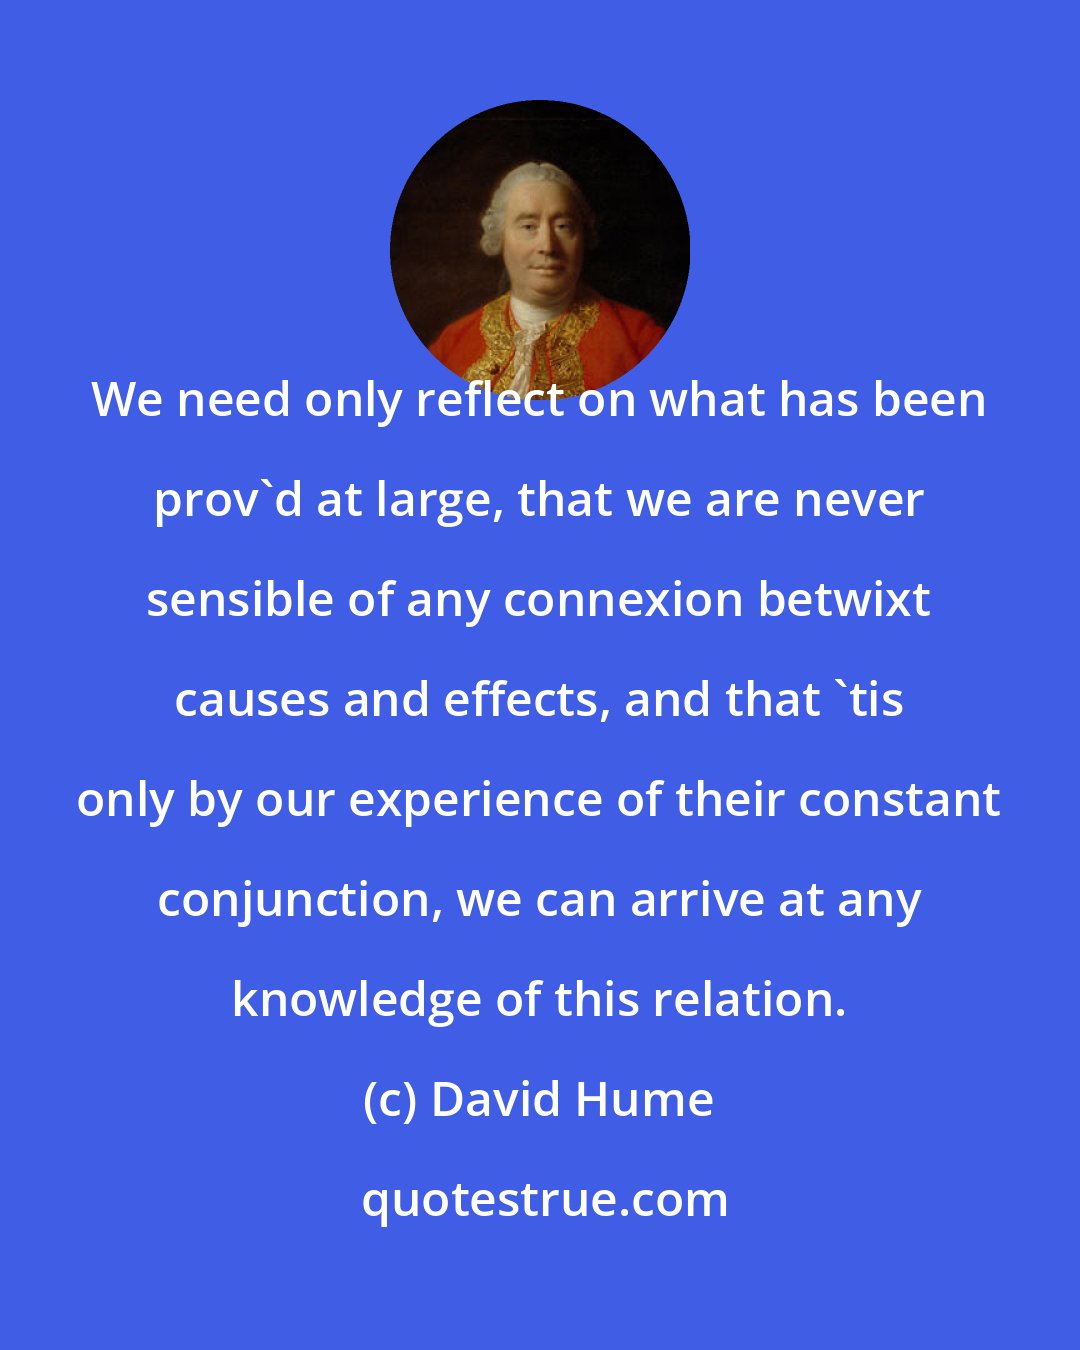 David Hume: We need only reflect on what has been prov'd at large, that we are never sensible of any connexion betwixt causes and effects, and that 'tis only by our experience of their constant conjunction, we can arrive at any knowledge of this relation.